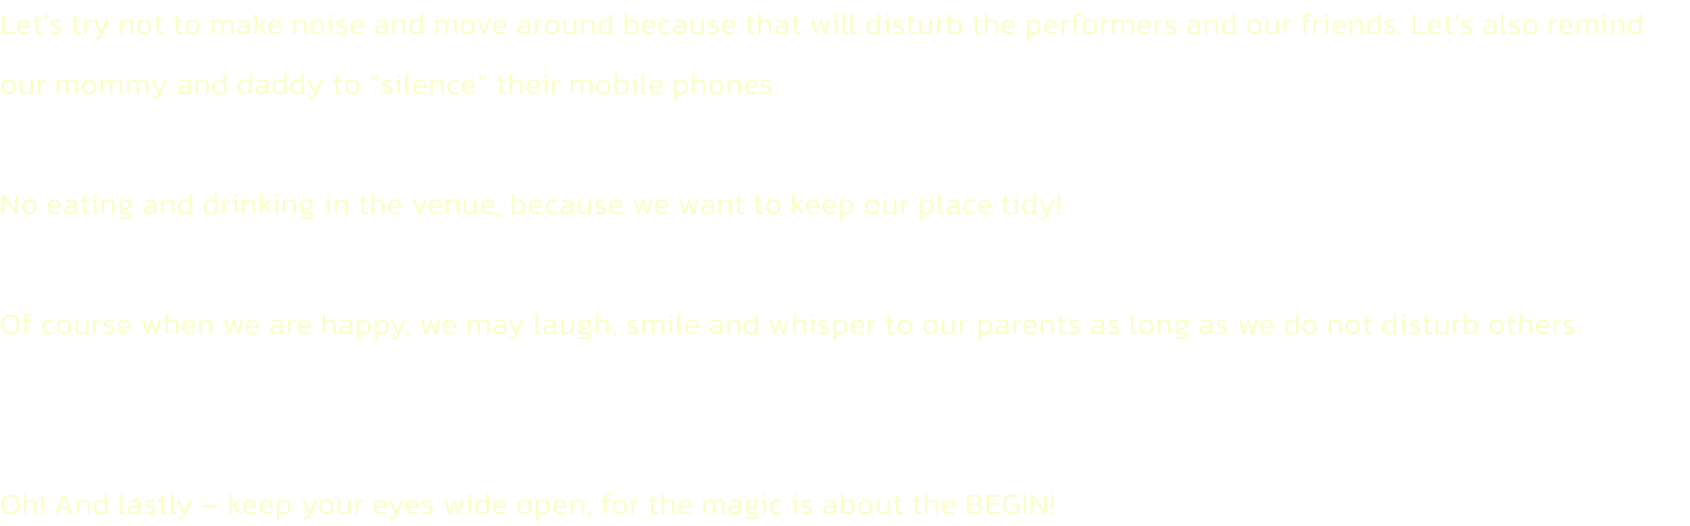 Lets try not to make noise and move around because that will disturb the performers and our friends. Lets also remind our mommy and daddy to silence their mobile phones.

No eating and drinking in the venue, because we want to keep our place tidy!

Of 